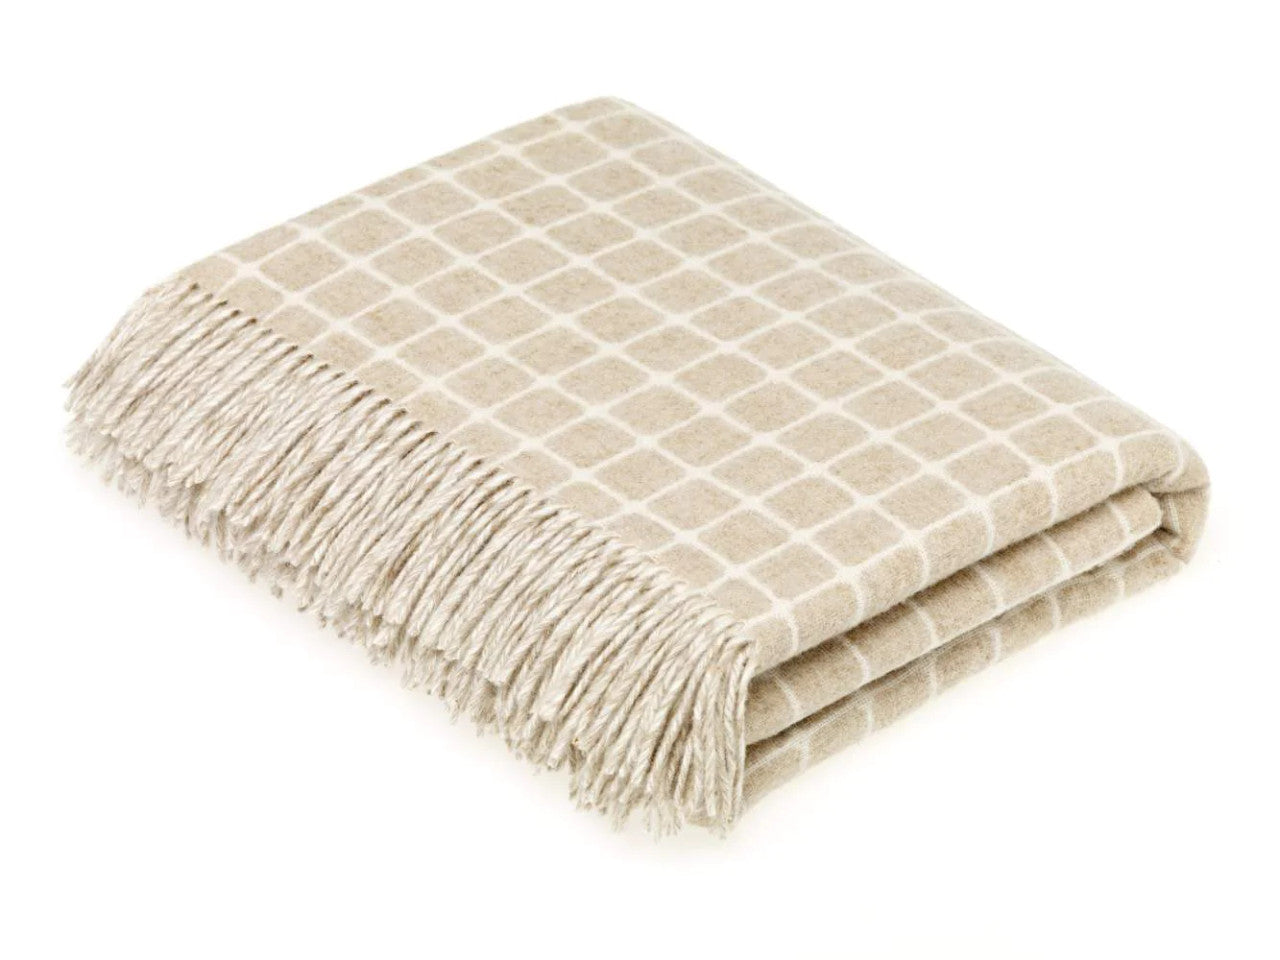 Classic Collection Athens Marino Lambswool Throw Blanket by Bronte Moon. Made in England.